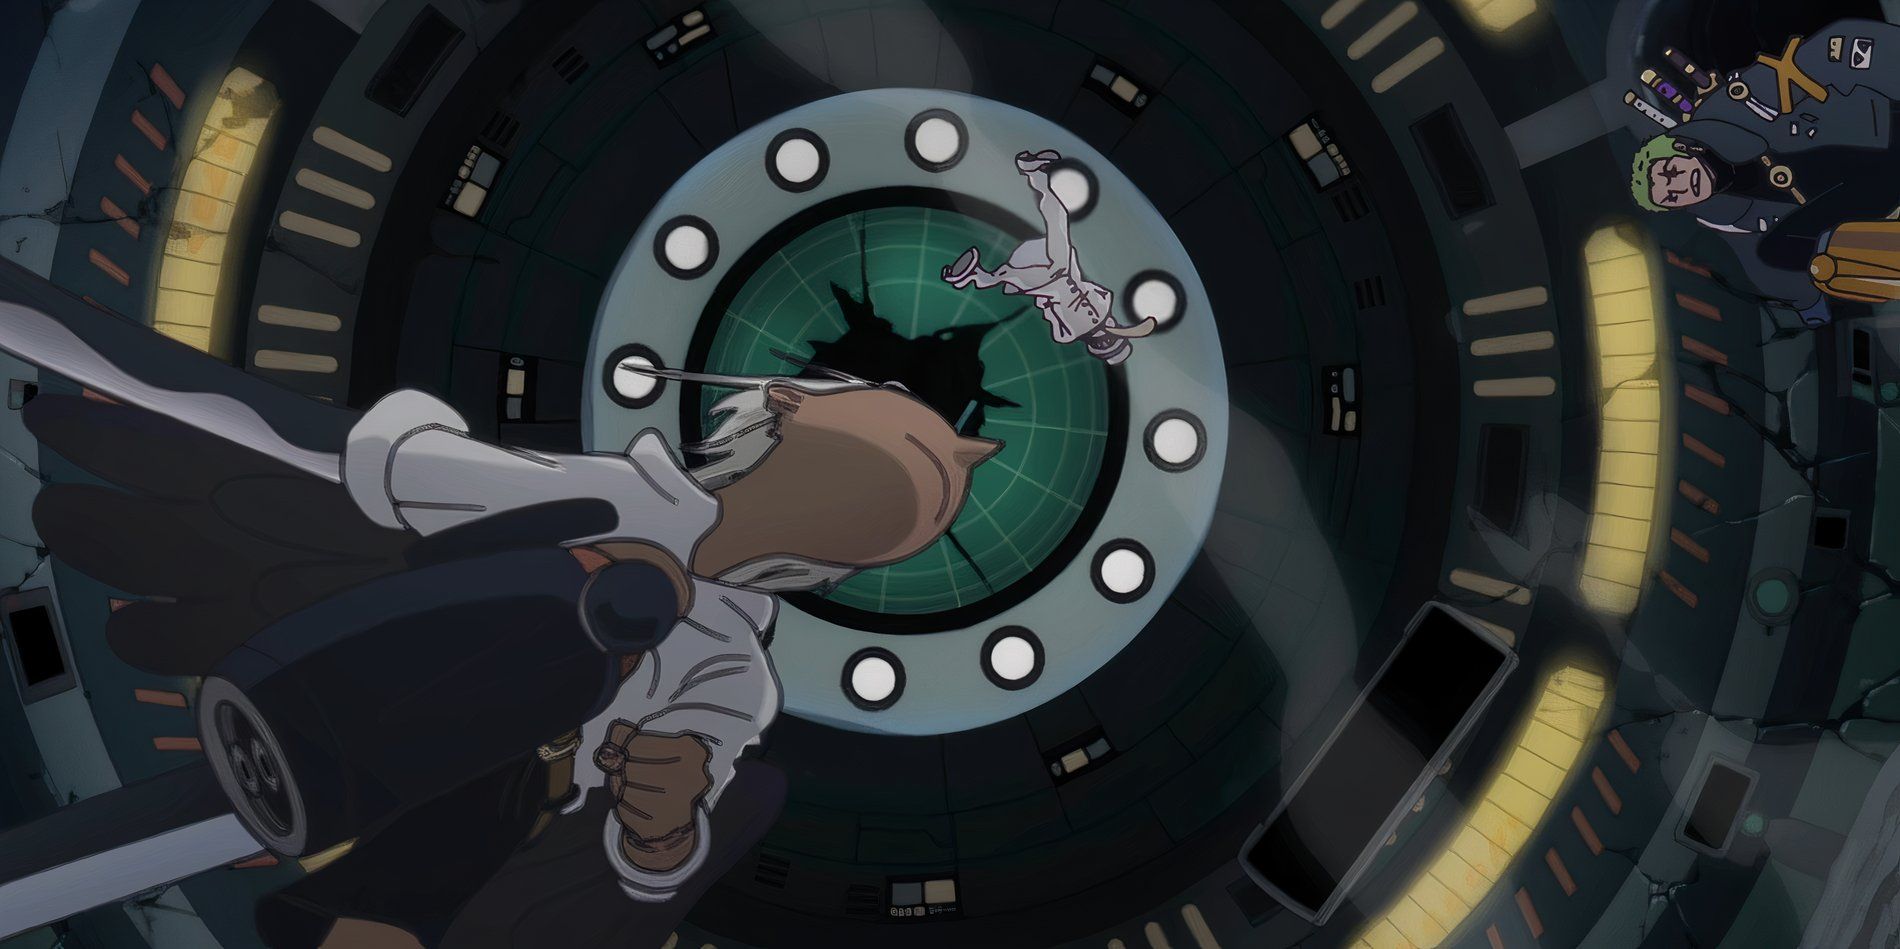 One Piece Anime Episode 1109 Seraphim S-Hawk lunging towards Zoro while a restrained Kaku is thrown into the air.